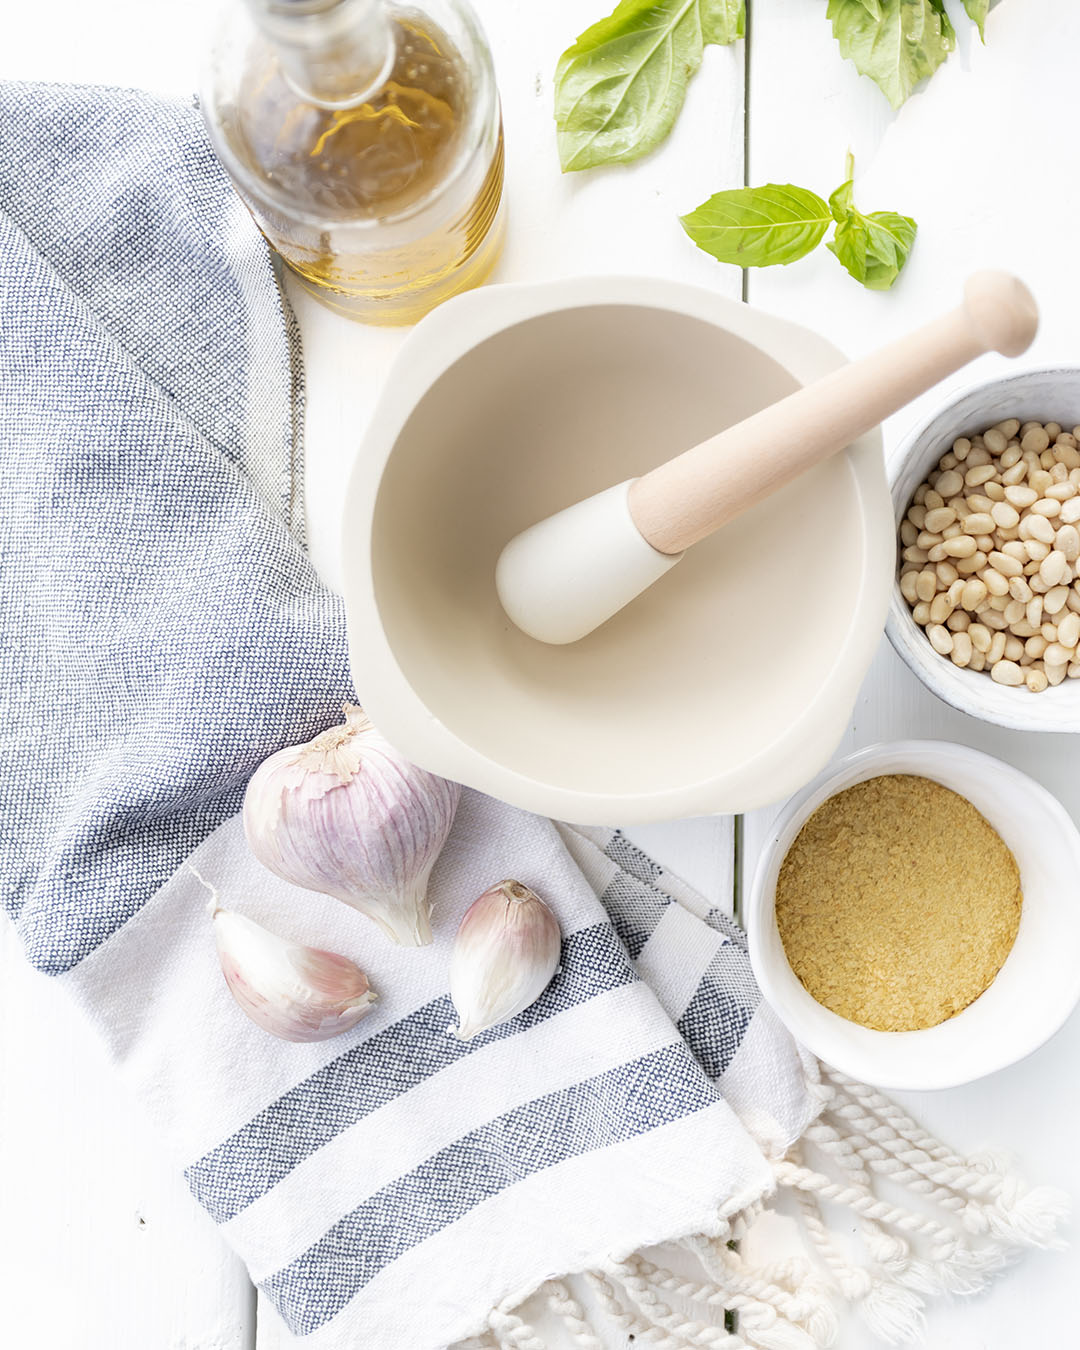 Have you ever made real pesto from scratch with a mortar and pestle? In today's post I'll share my plant-based version of the recipe as well as the process for making pesto by hand!